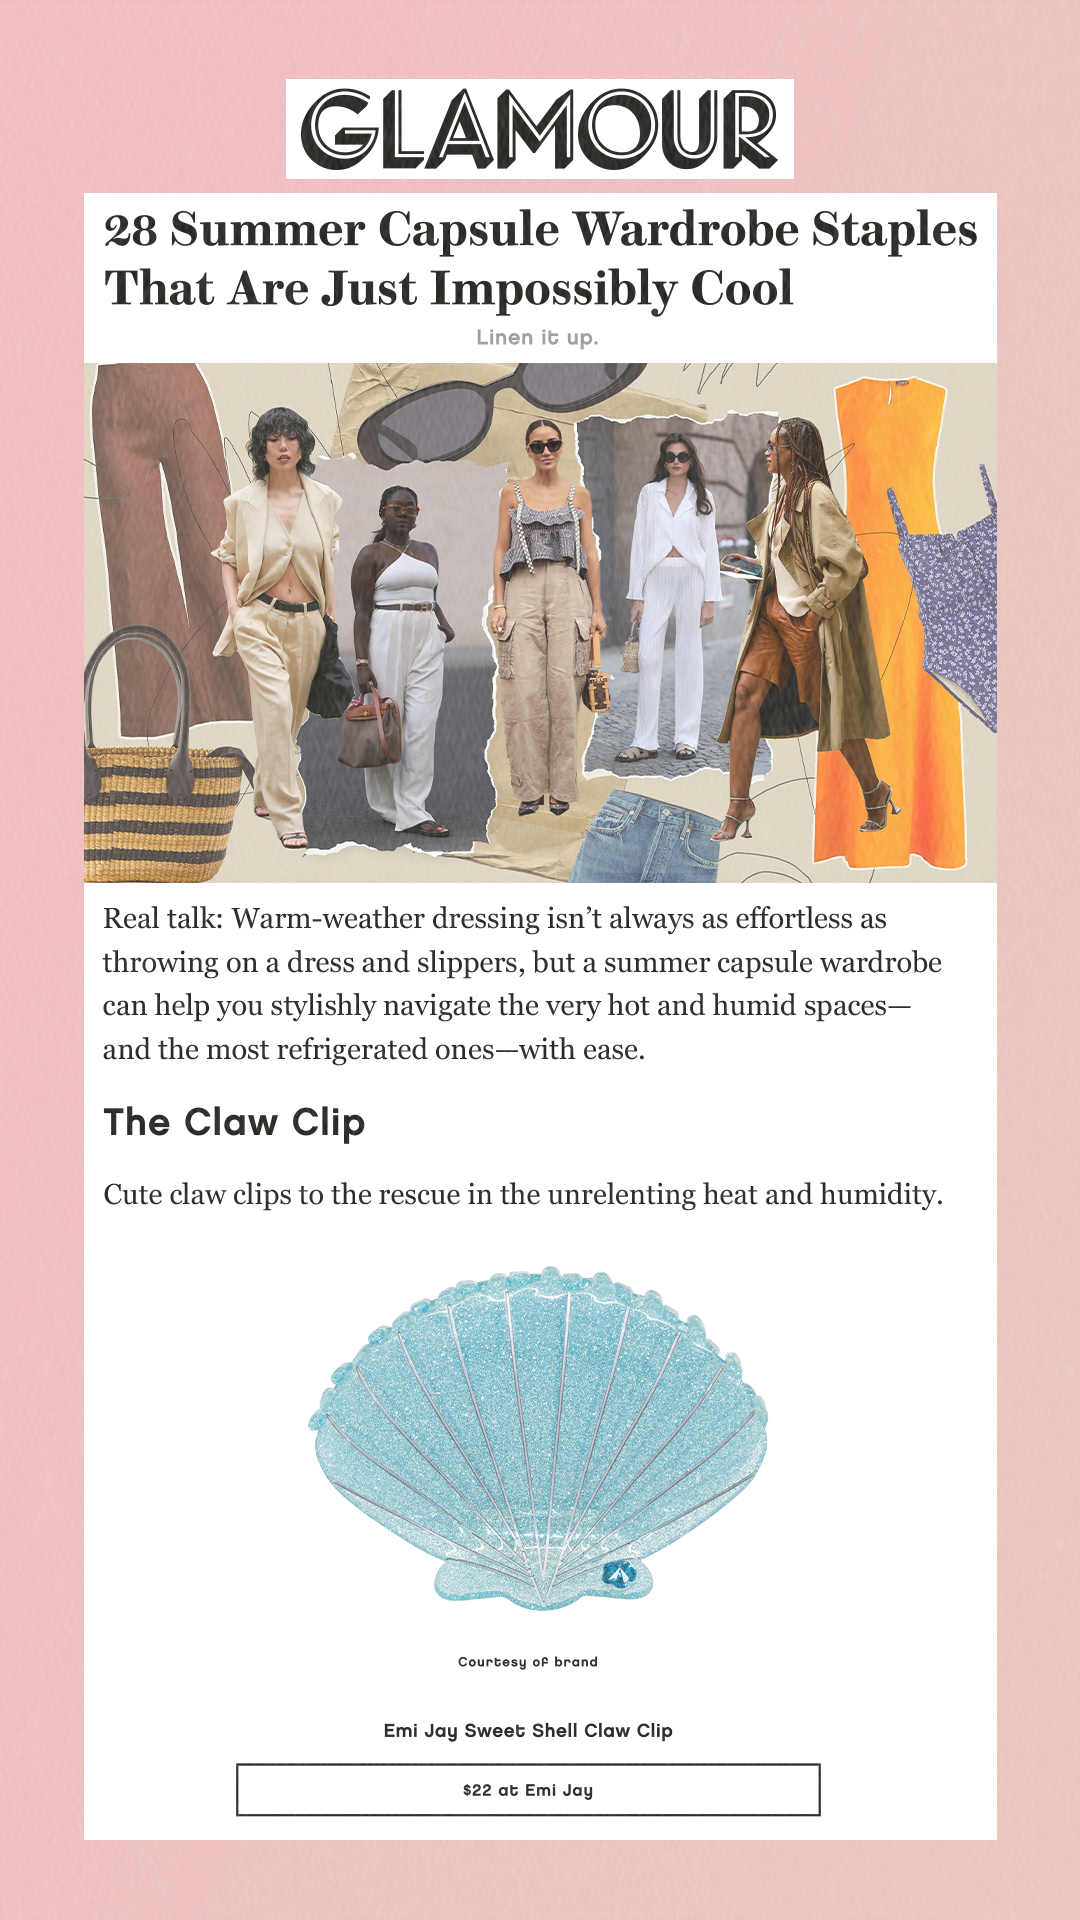 28 Summer Capsule Wardrobe Staples That Are Just Impossibly Cool Linen it up. Real talk: Warm-weather dressing isn’t always as effortless as throwing on a dress and slippers, but a summer capsule wardrobe can help you stylishly navigate the very hot and humid spaces—and the most refrigerated ones—with ease. The Claw Clip Cute claw clips to the rescue in the unrelenting heat and humidity. Courtesy of brand. Emi Jay Sweet Shell Claw Clip $22 at Emi Jay